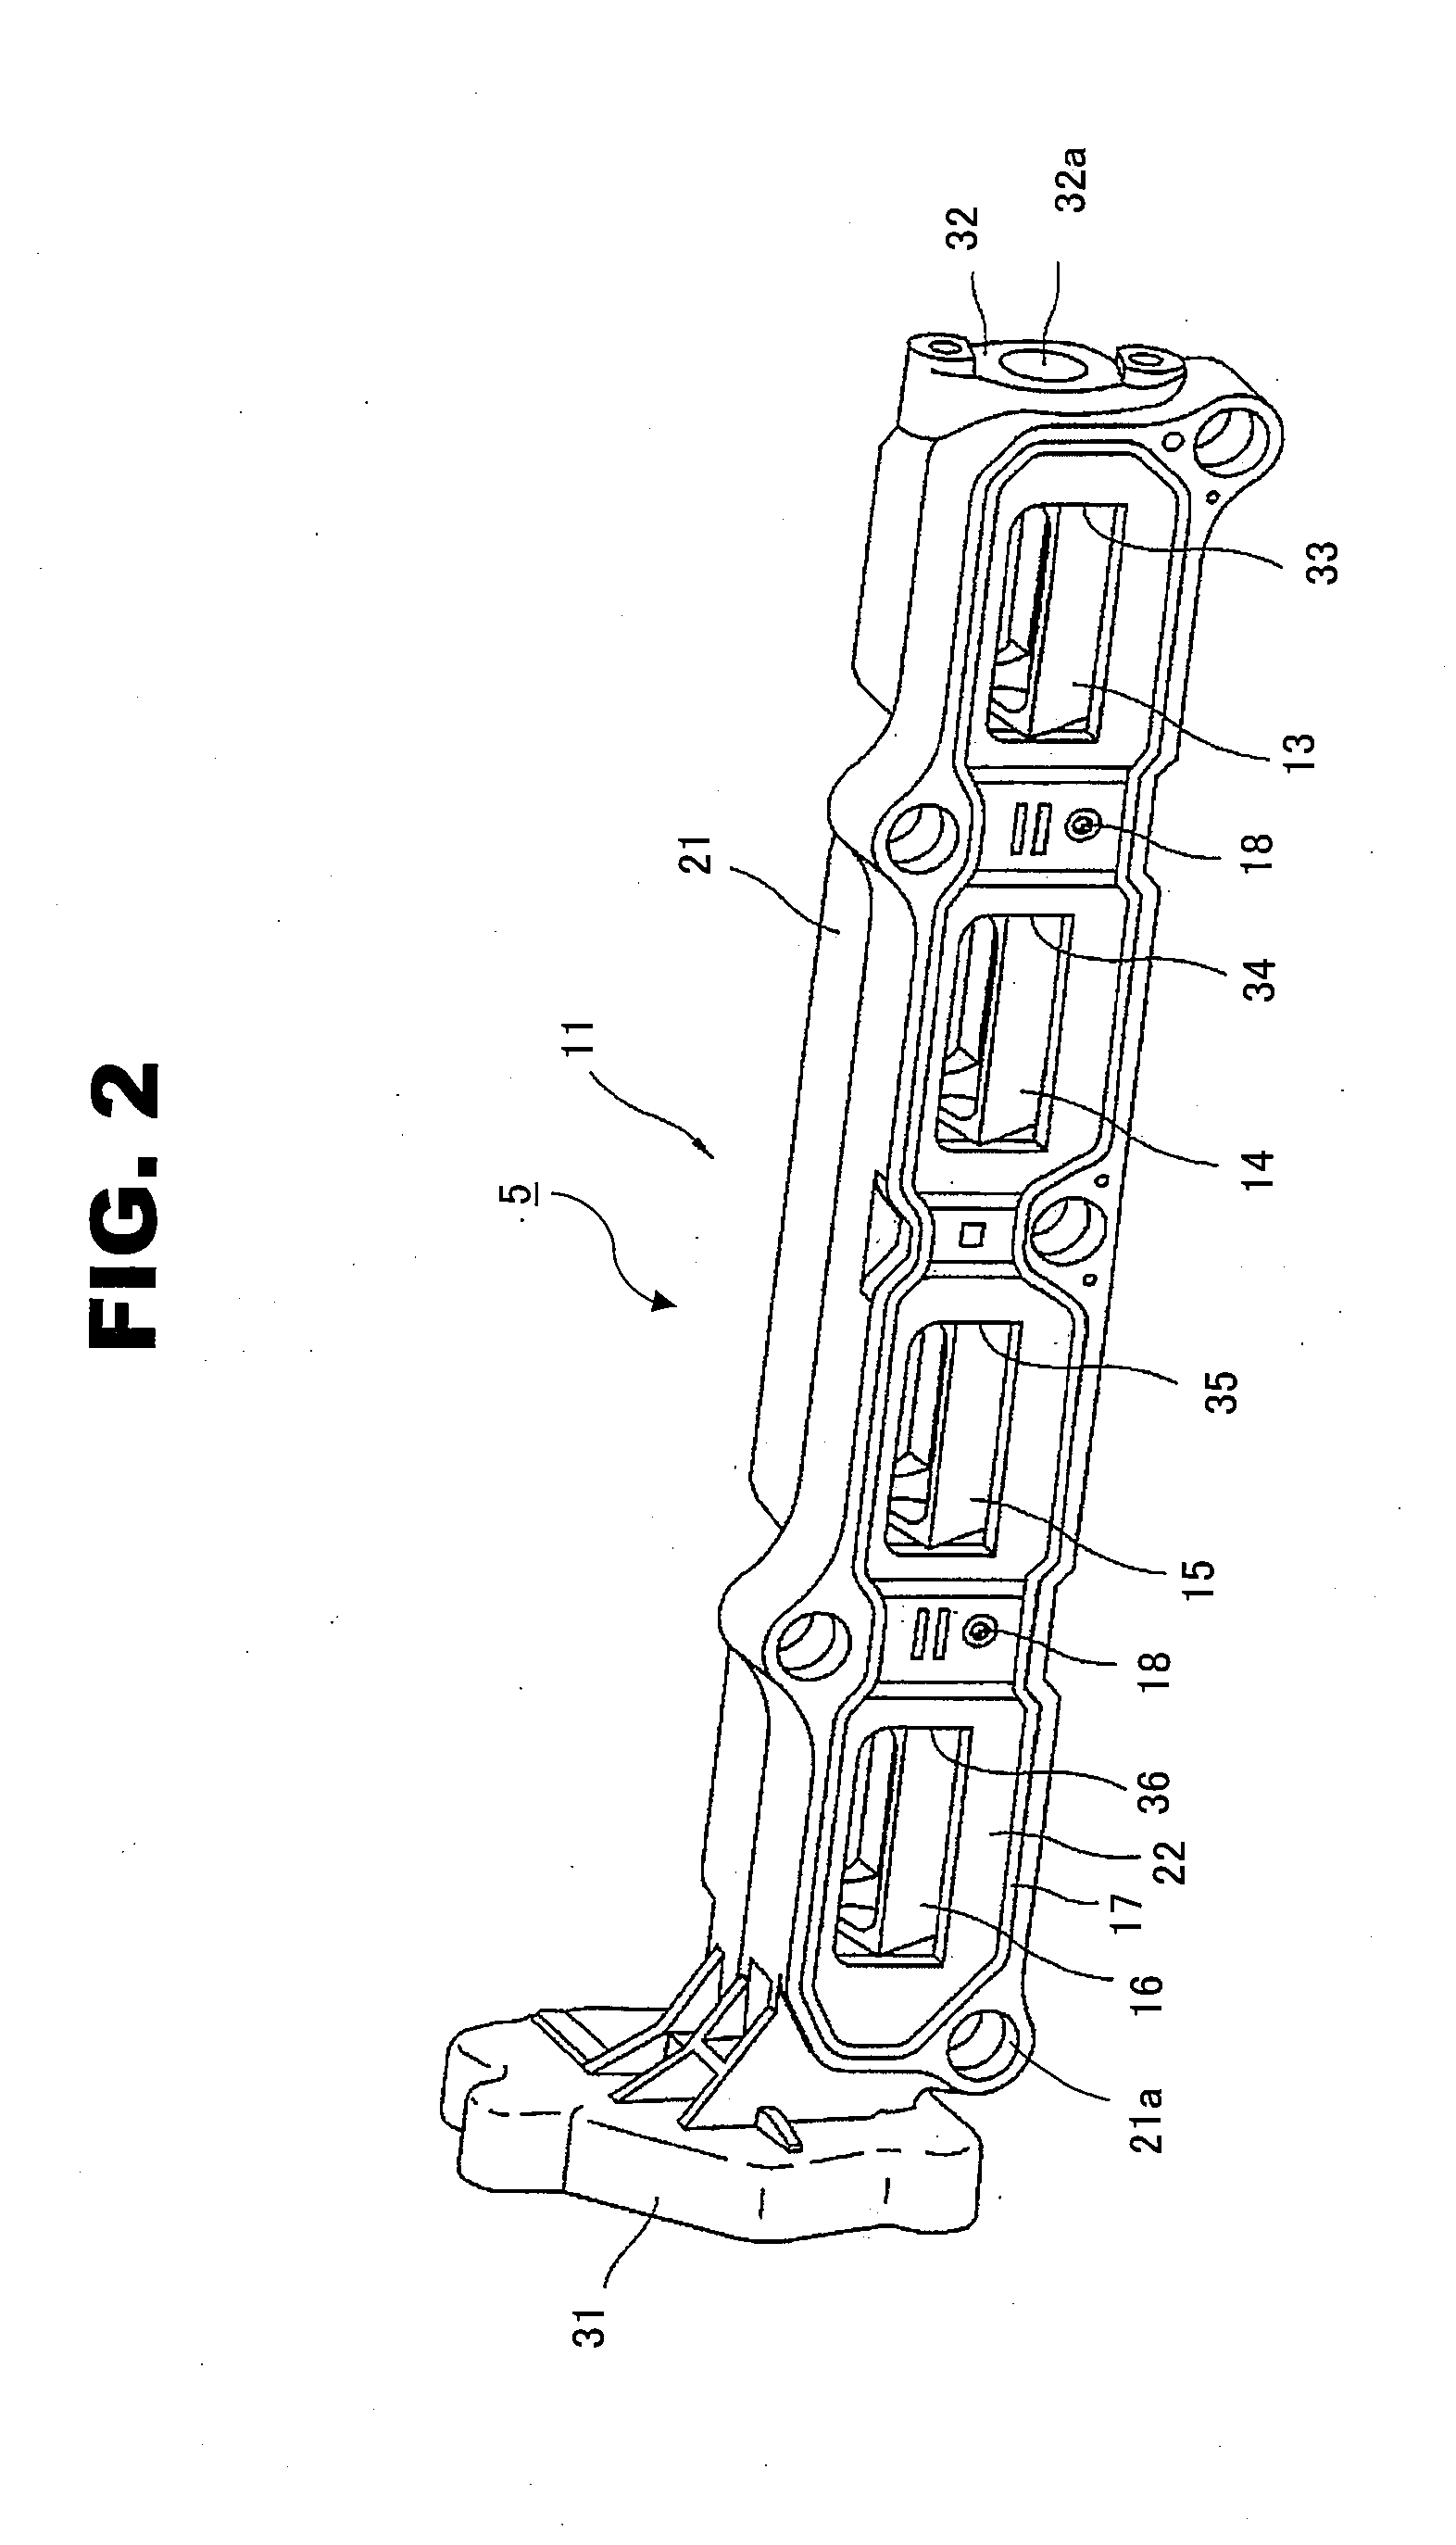 Air intake system for internal combustion engine